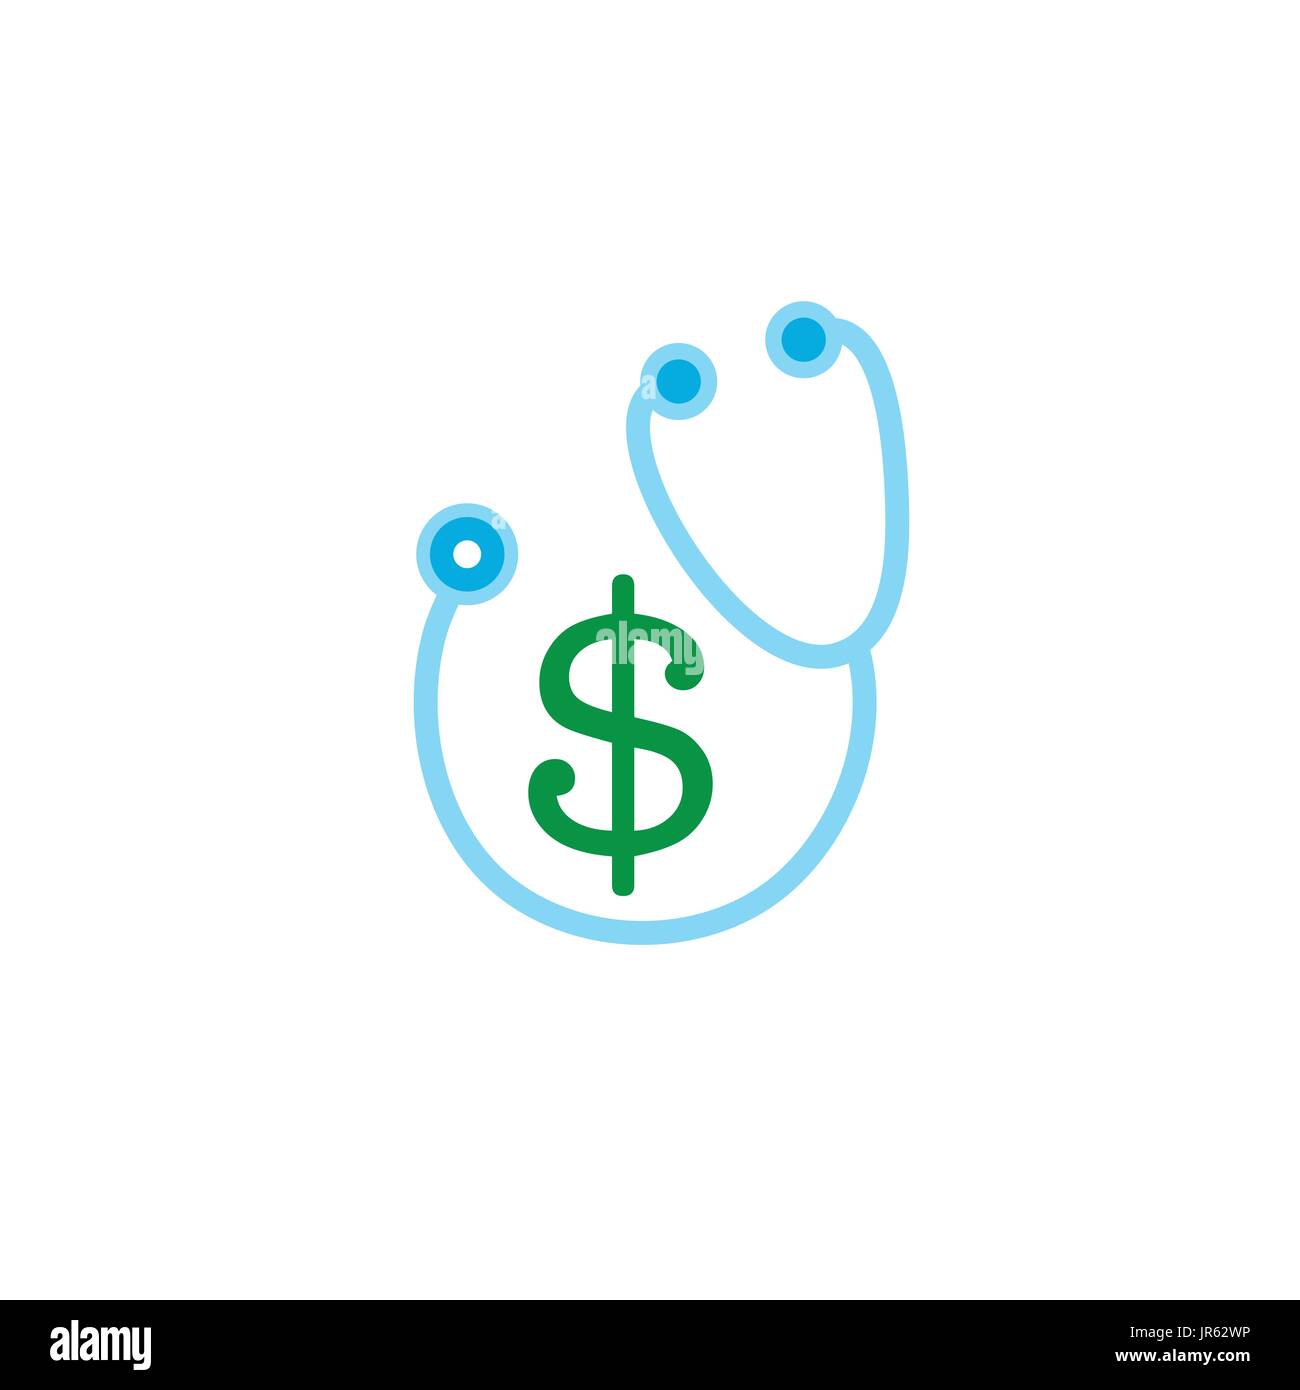 Healthcare costs and expenses showing concept w stethoscope Stock Vector